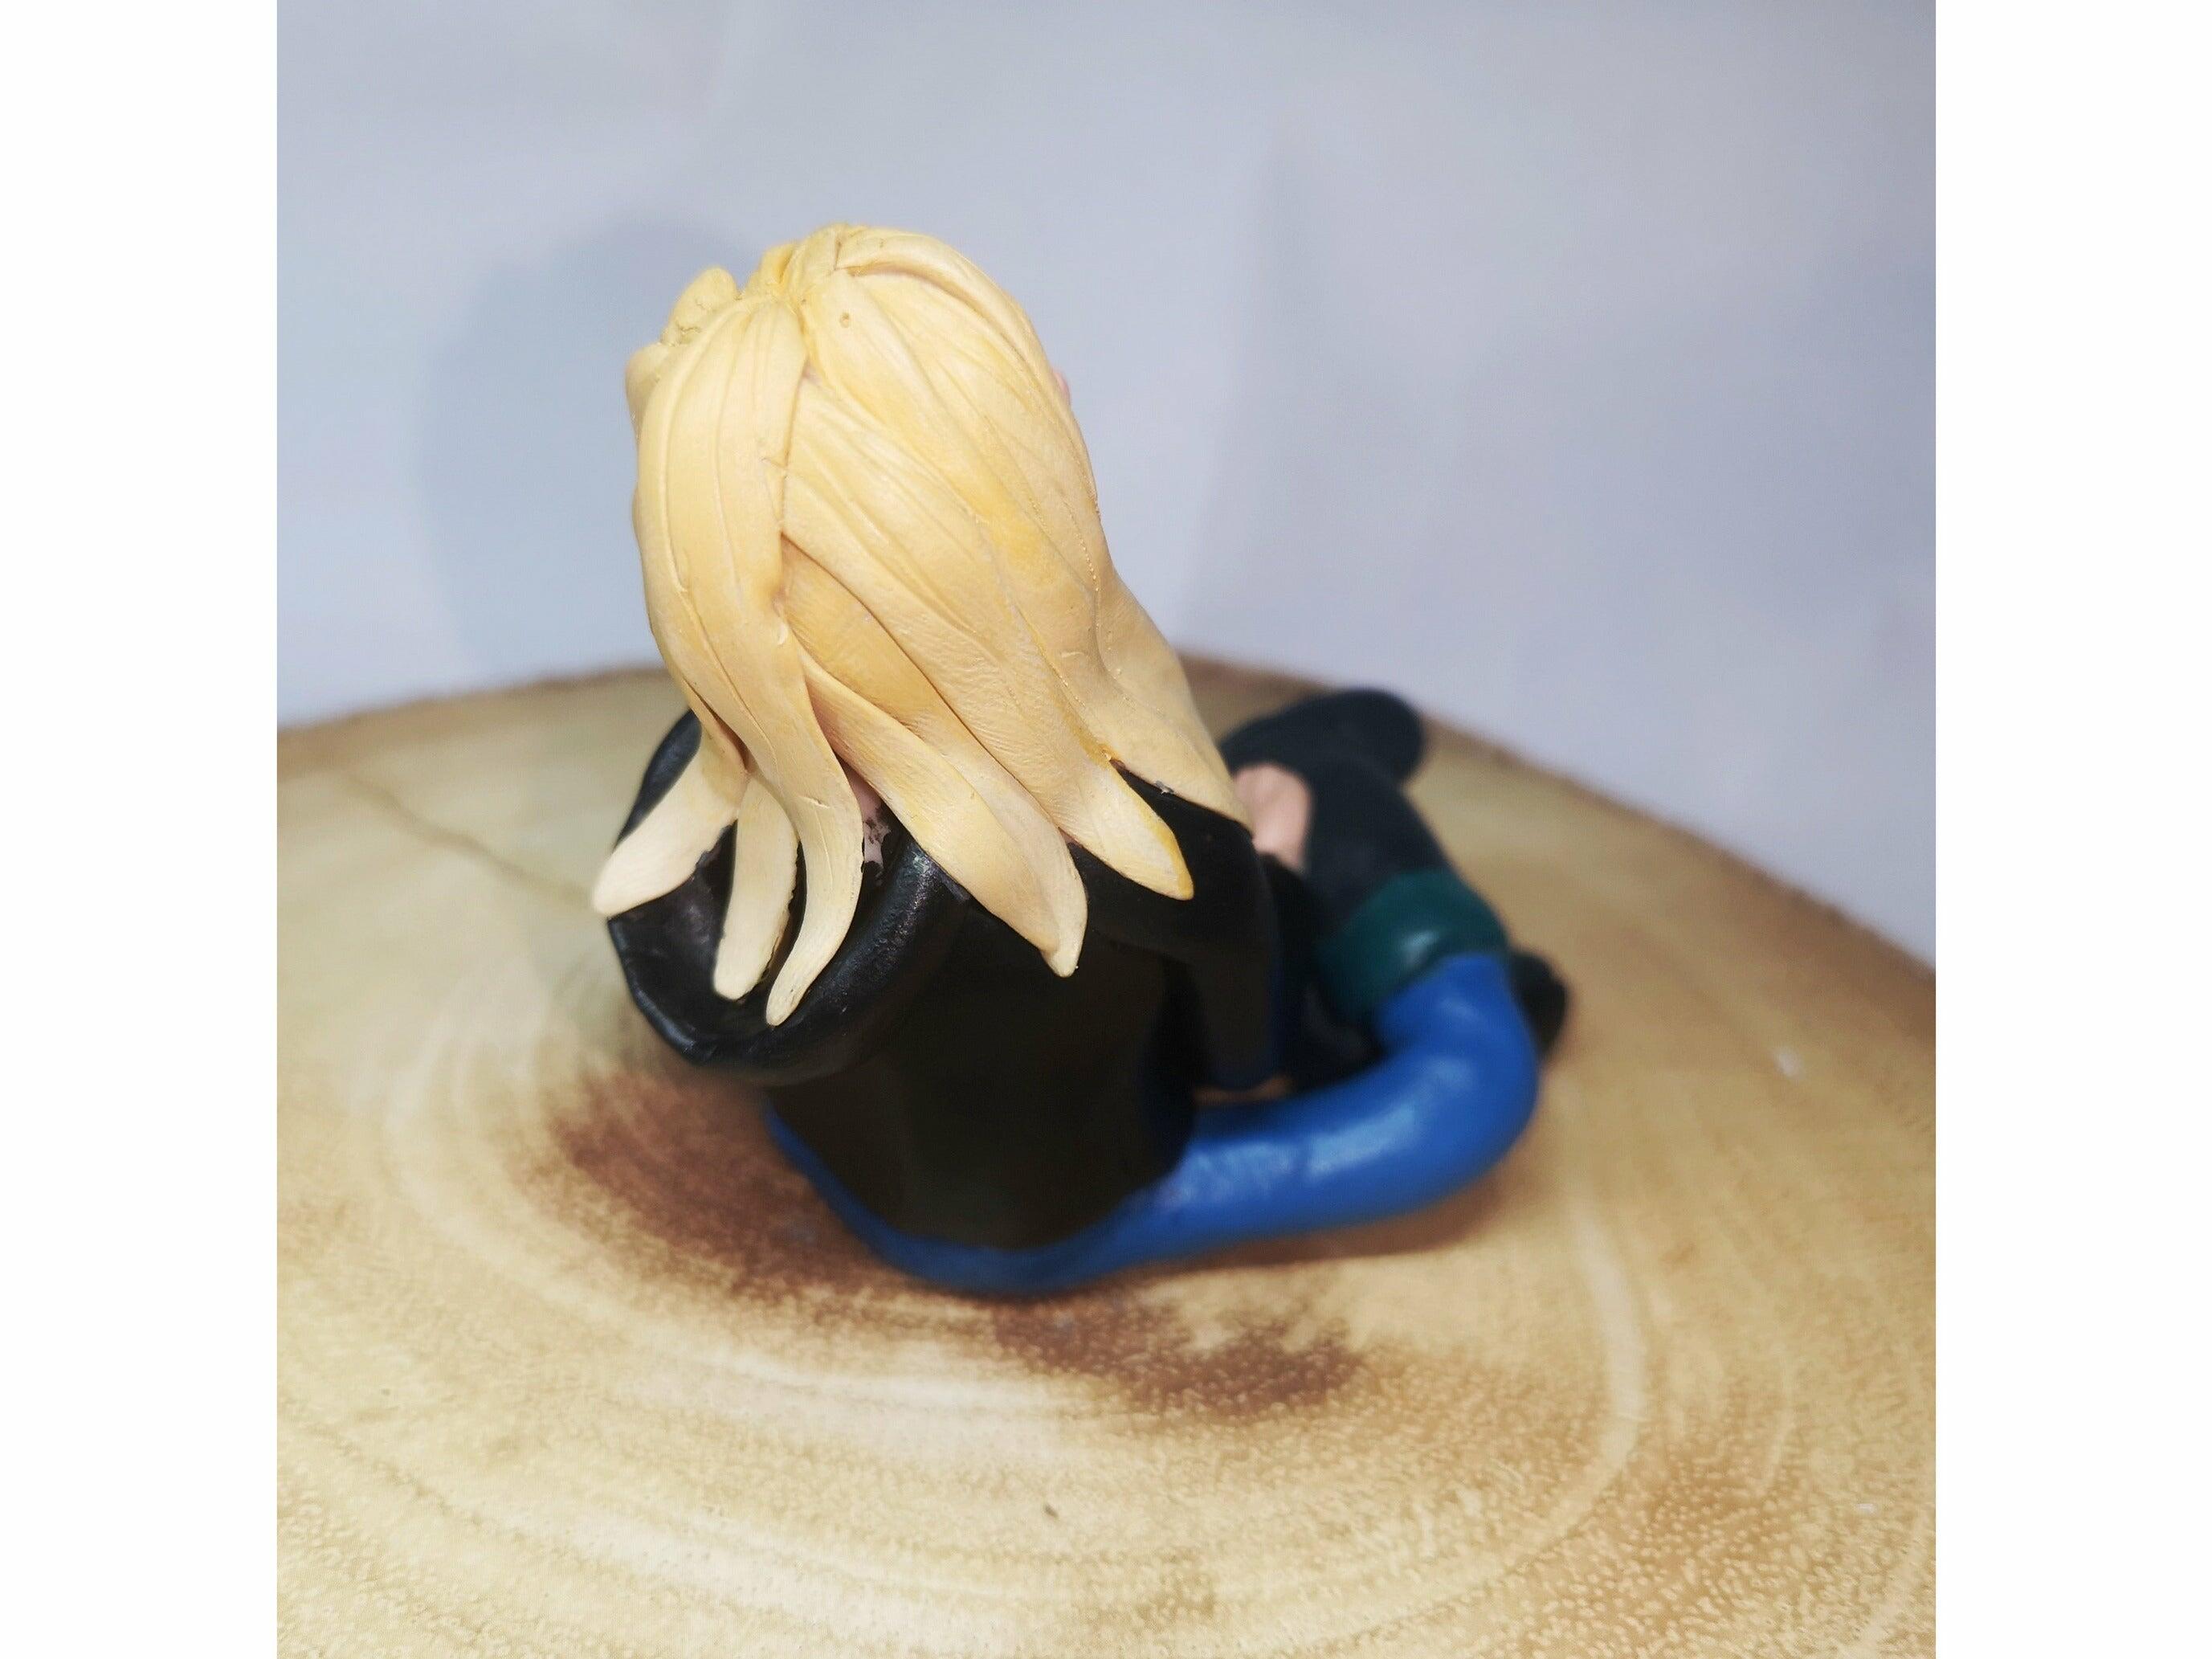 A zoomed in photo of a clay model of a blonde girl showing the detail of the sculpting of her hair